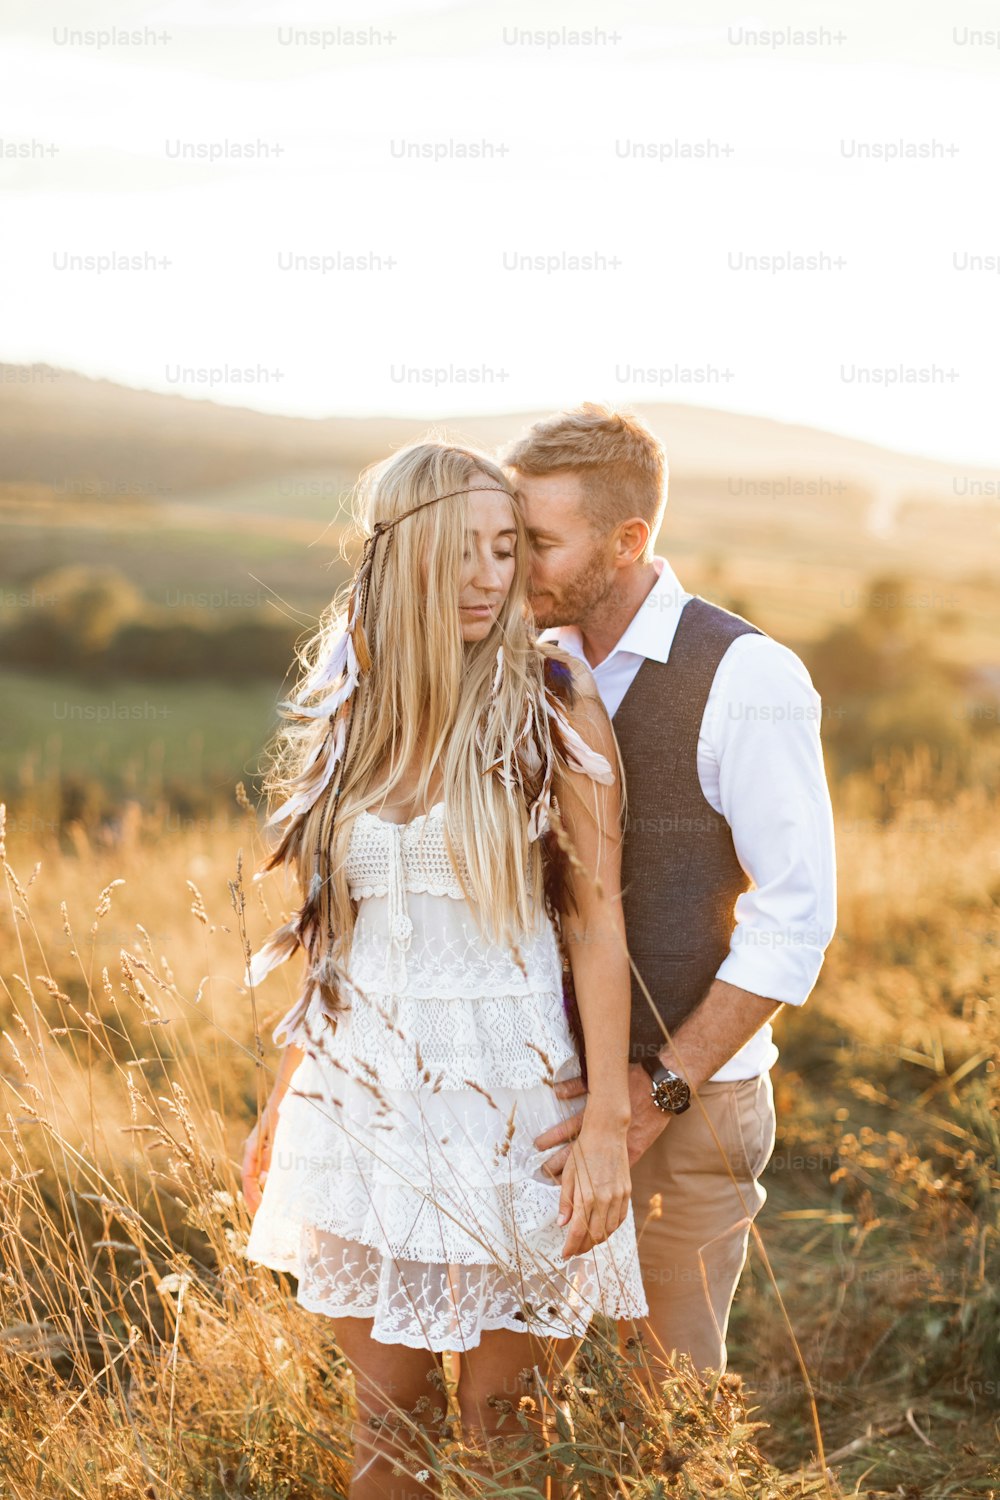 boho couple holding hands and embracing together, walking in countryside field. Pretty woman in white dress and boho feather accessories in hair, handsome man in casual suit.